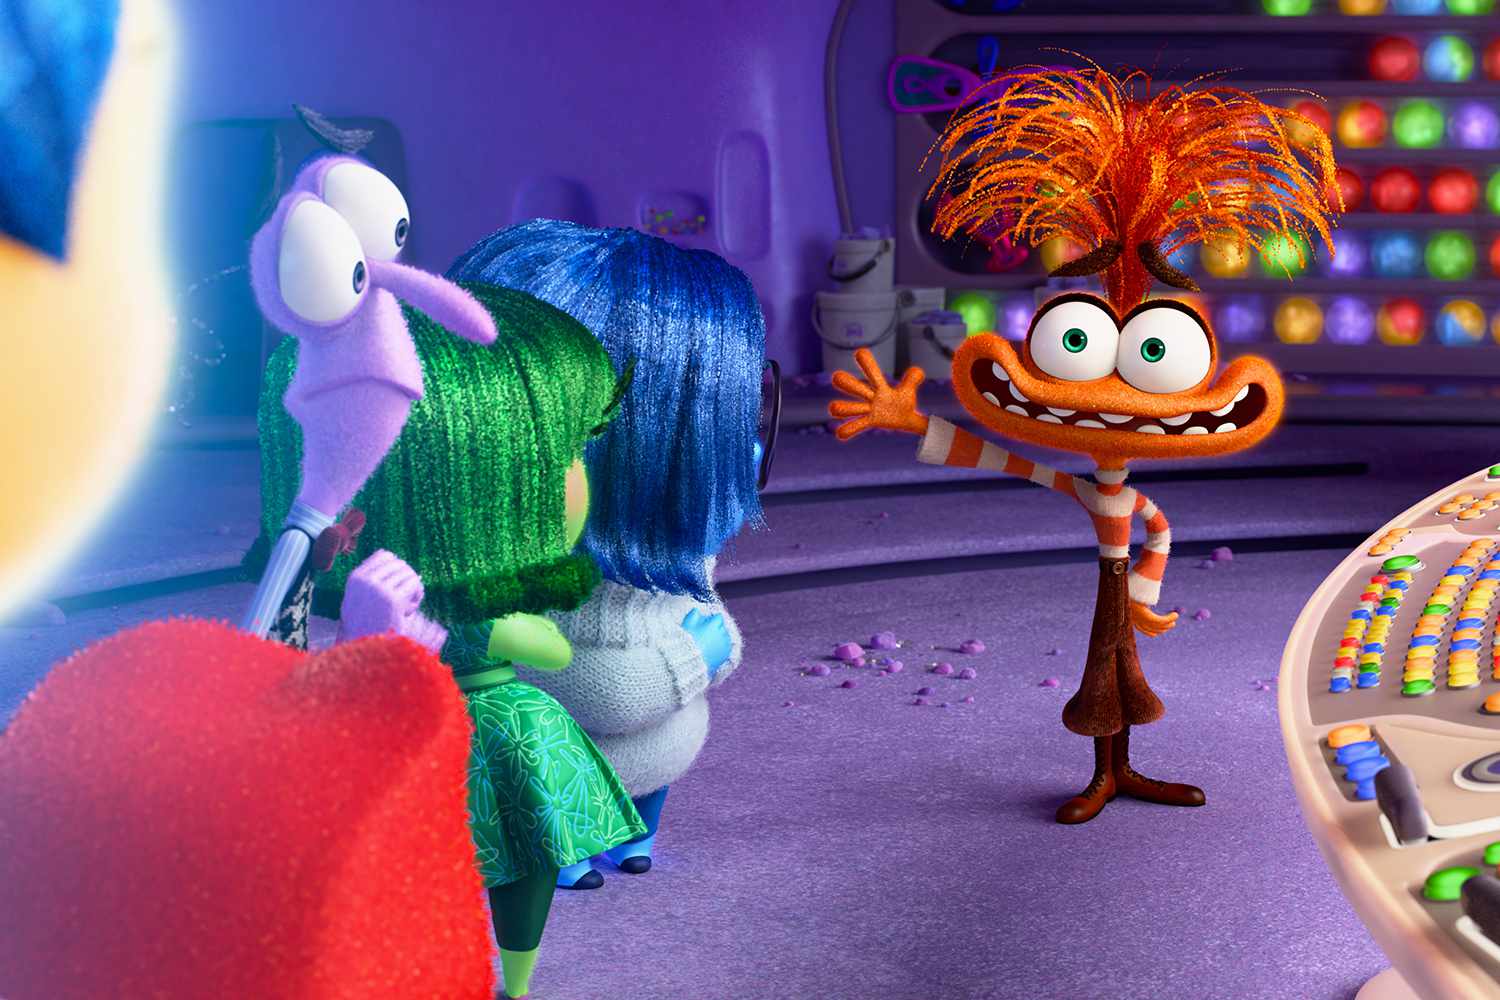 Inside Out 2 Explores Anxiety in Adolescence with Emotional Depth